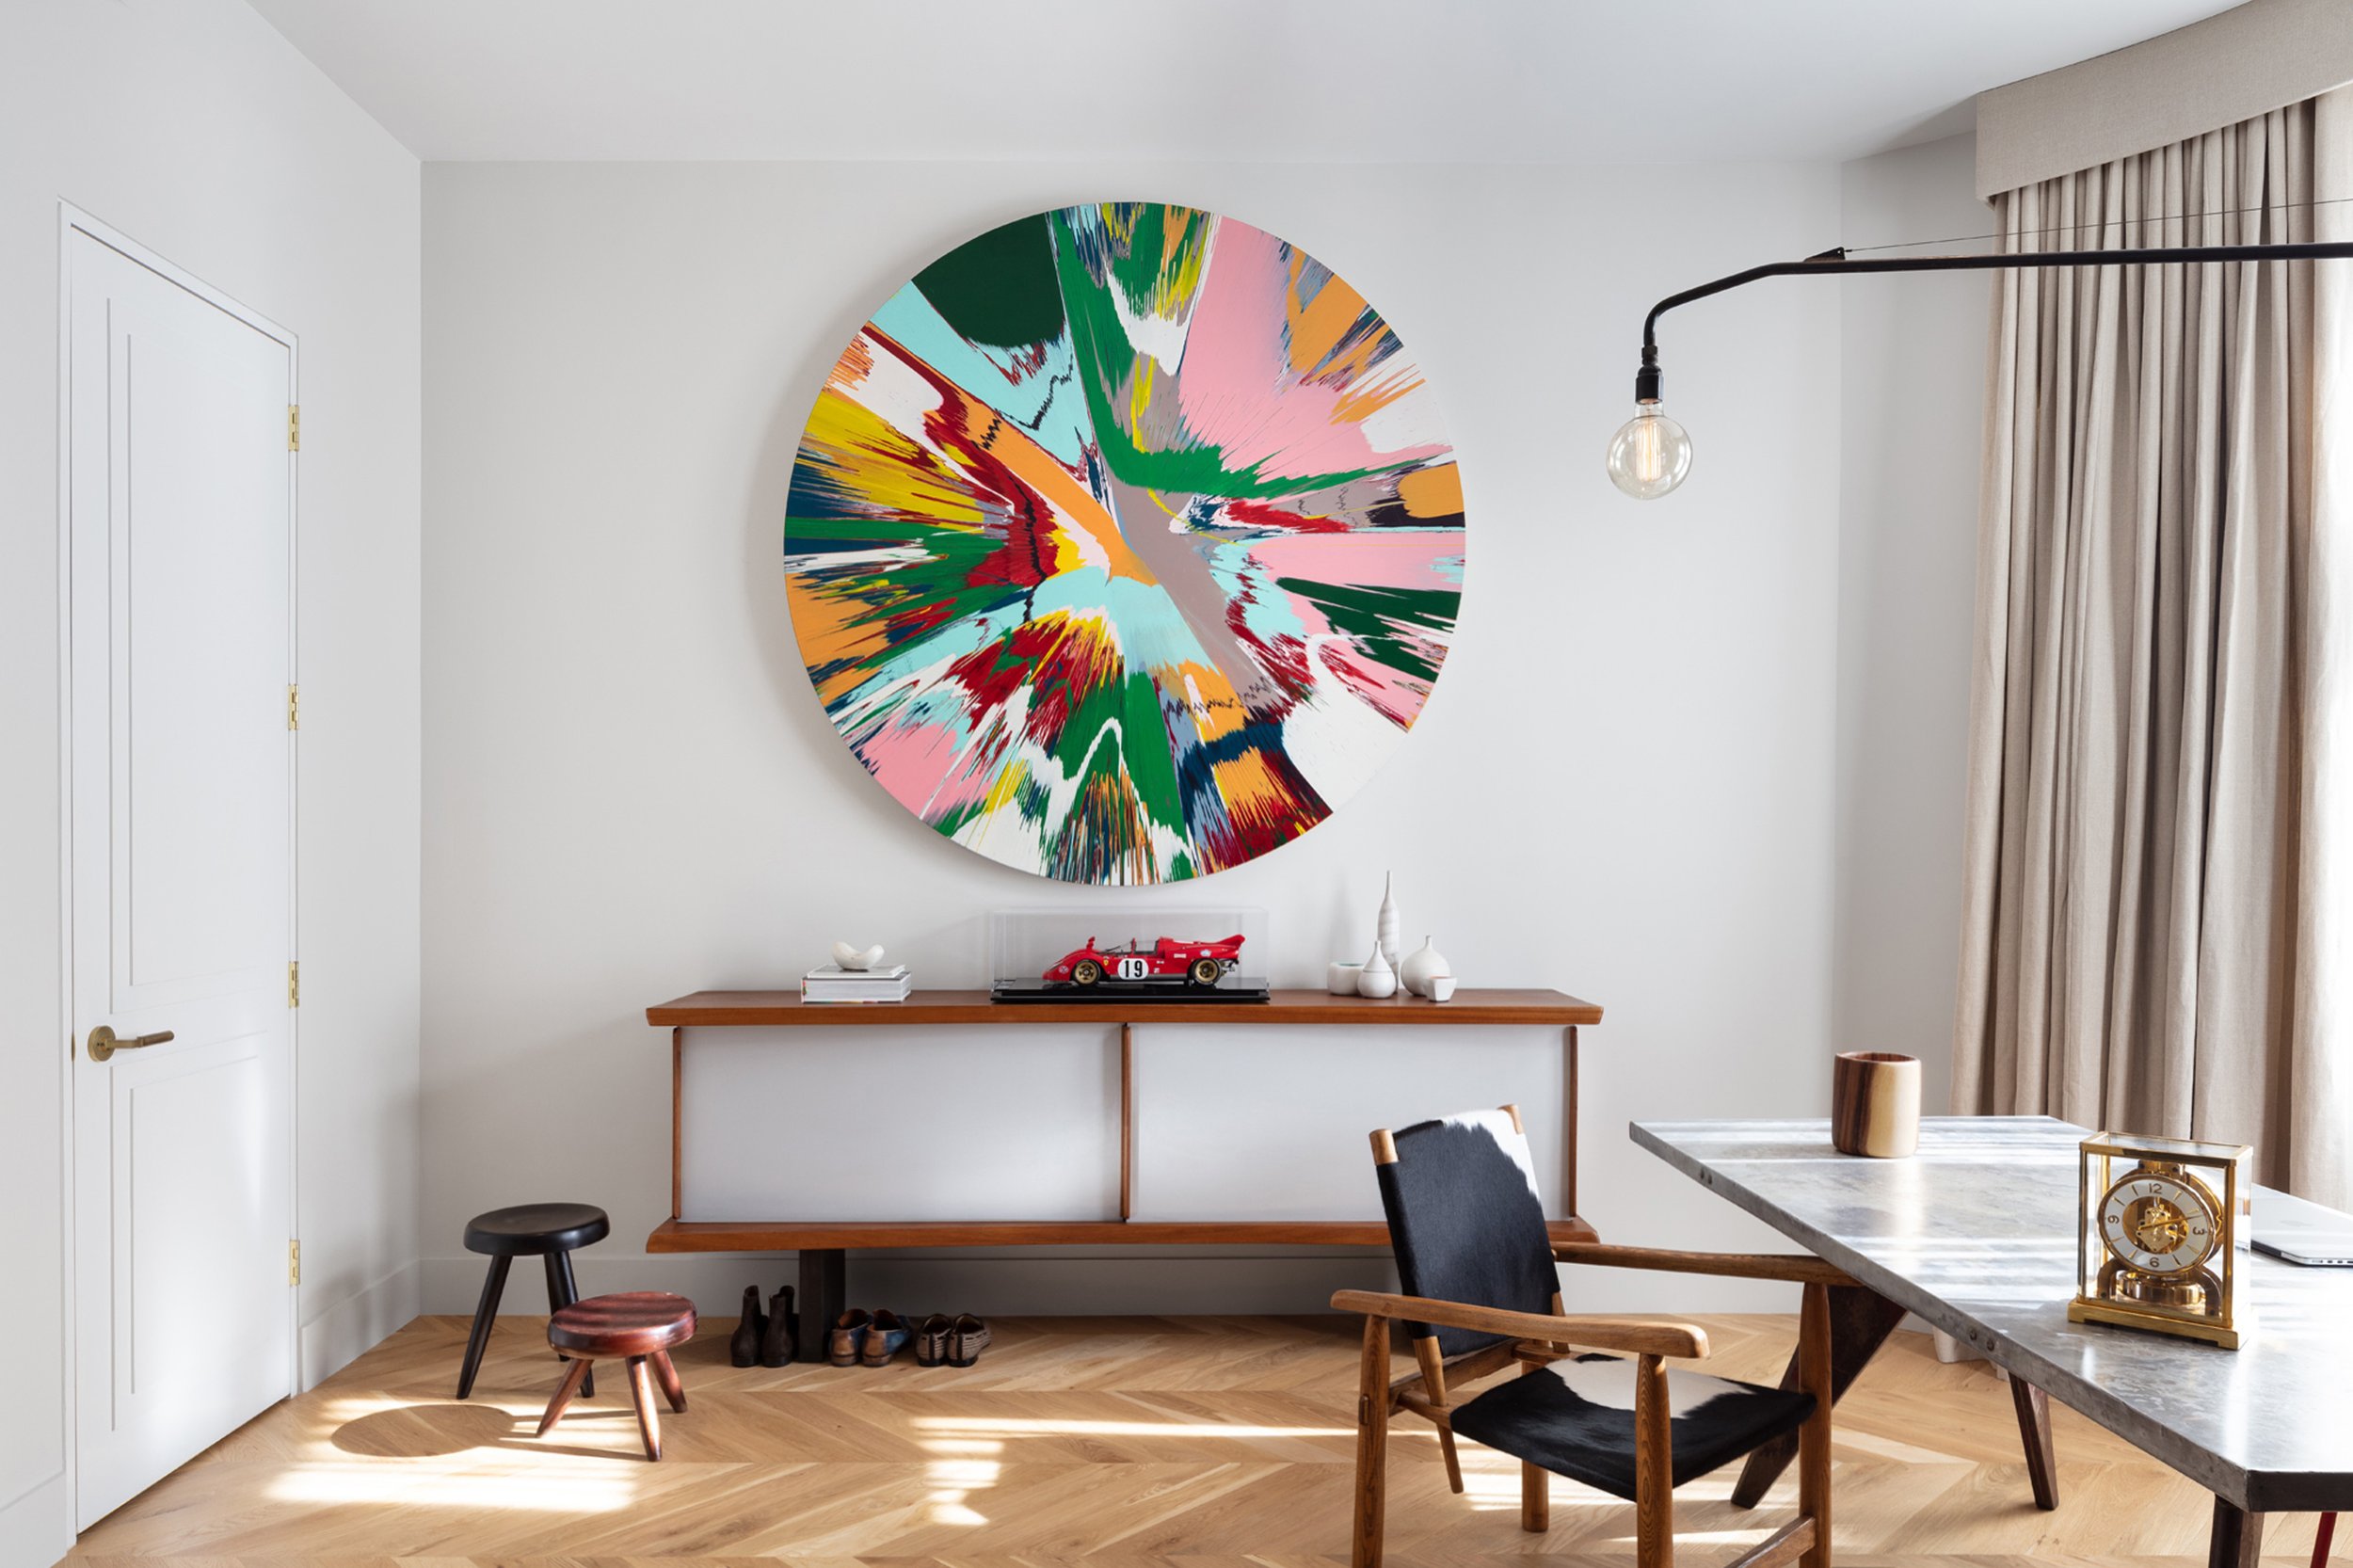  Charlap Hyman &amp; Herrero  Tina Kim Townhouse    A   Damien Hirst “Spin” painting hangs above a Charlotte Perriand cabinet in Tina Kim’s townhouse. The armchair and stools also designed by Perriand, pairs well with the aluminum-top table and arm l